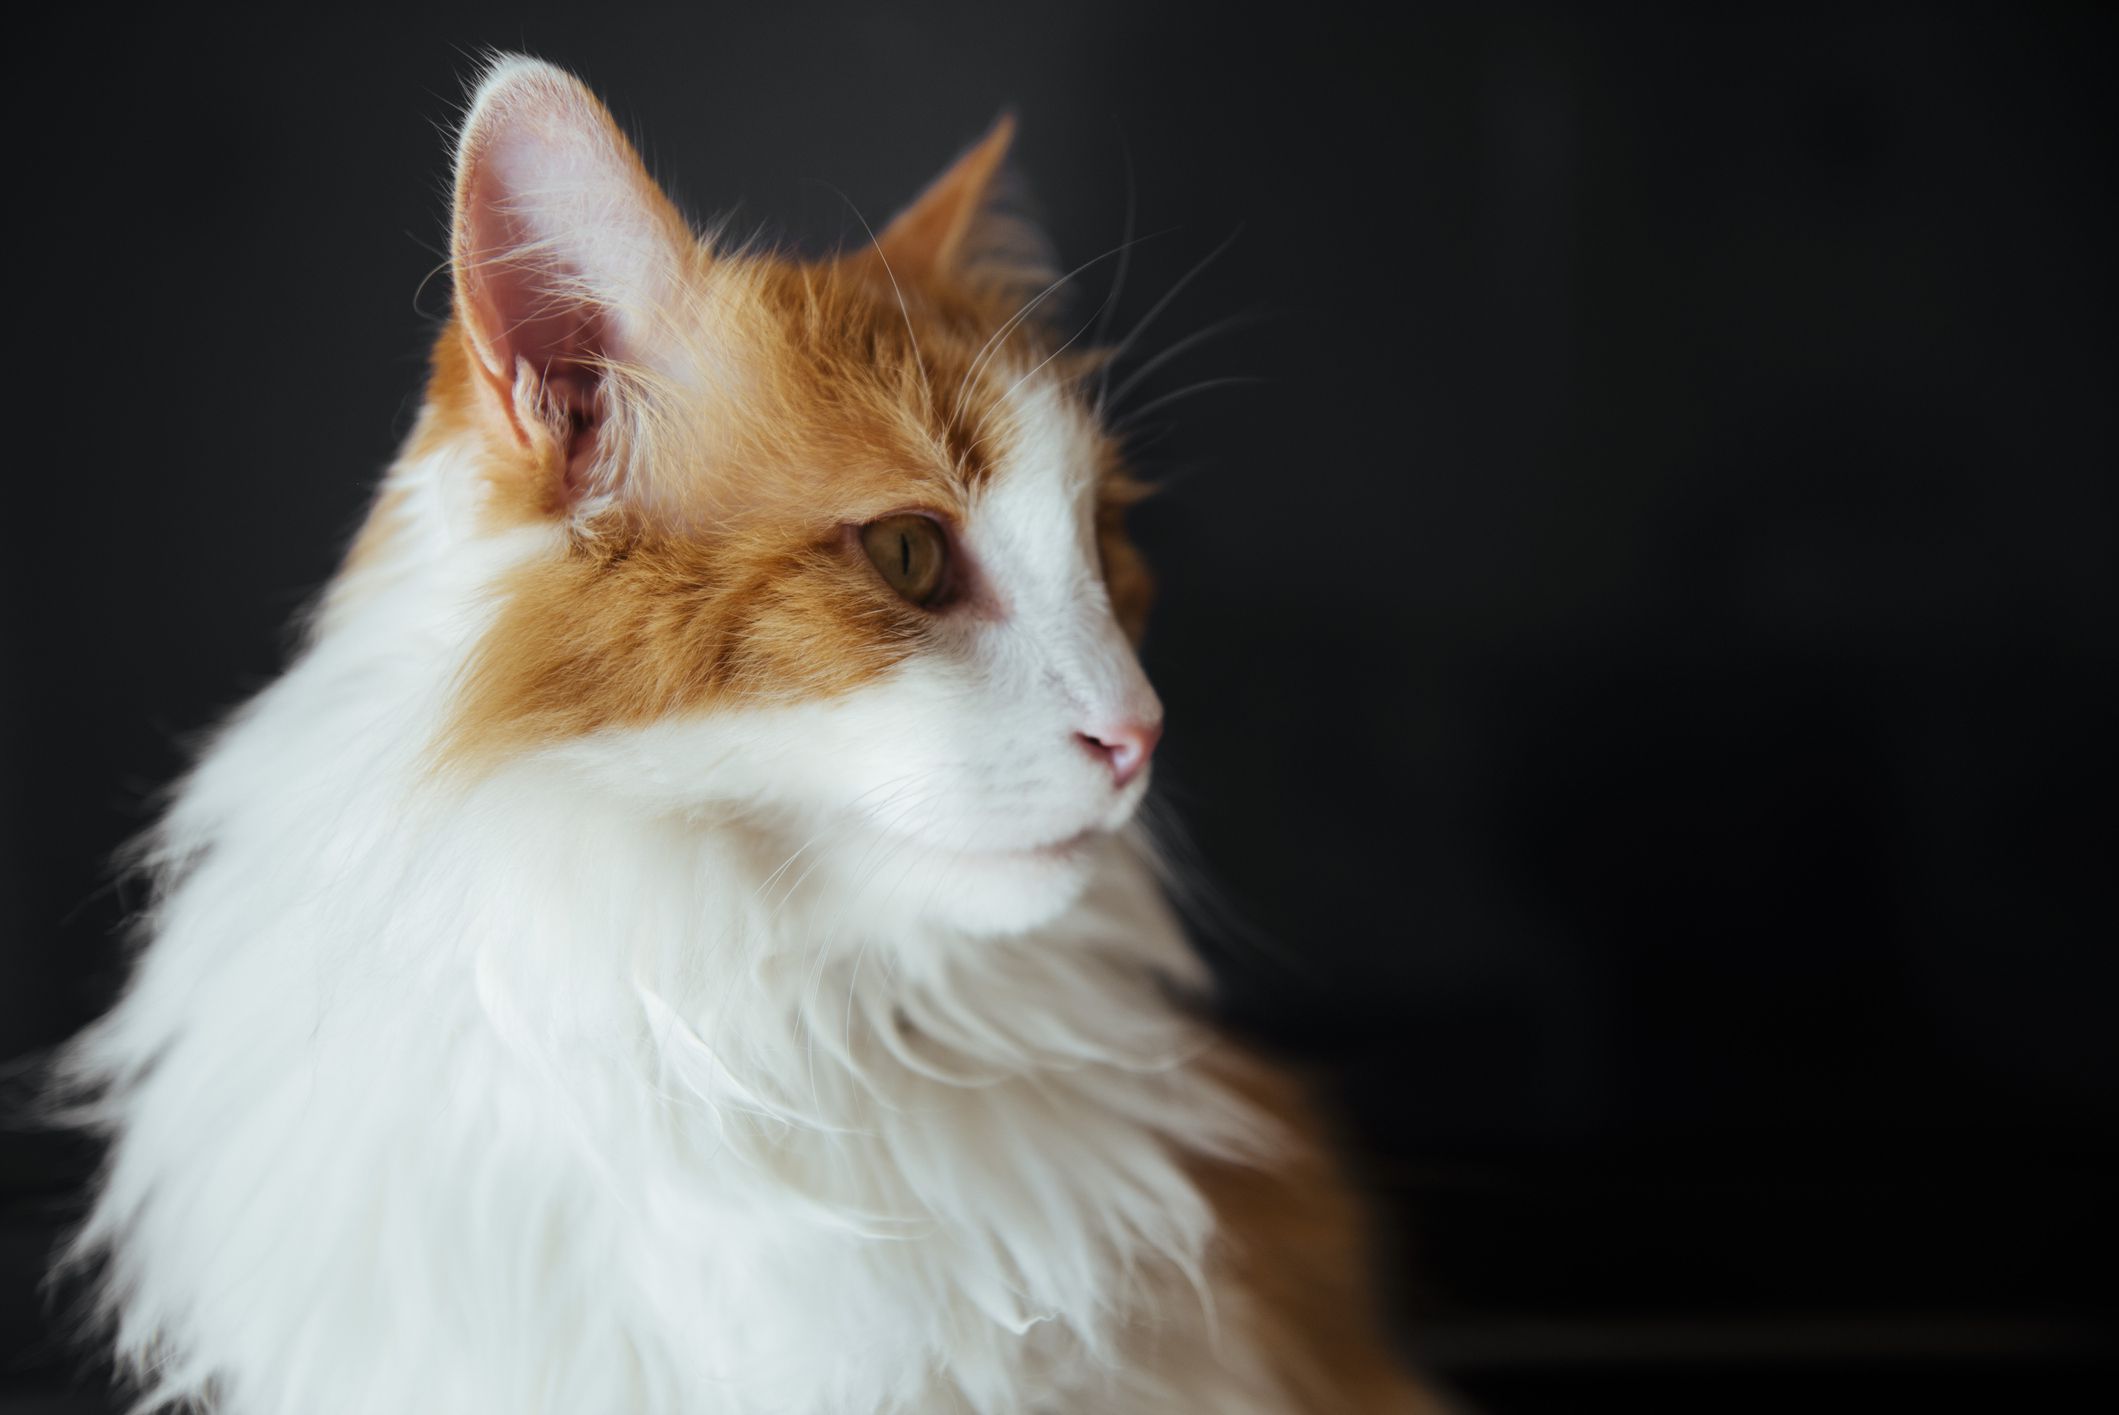 A large, fluffy cat with orange and white markings in front of a solid black background.